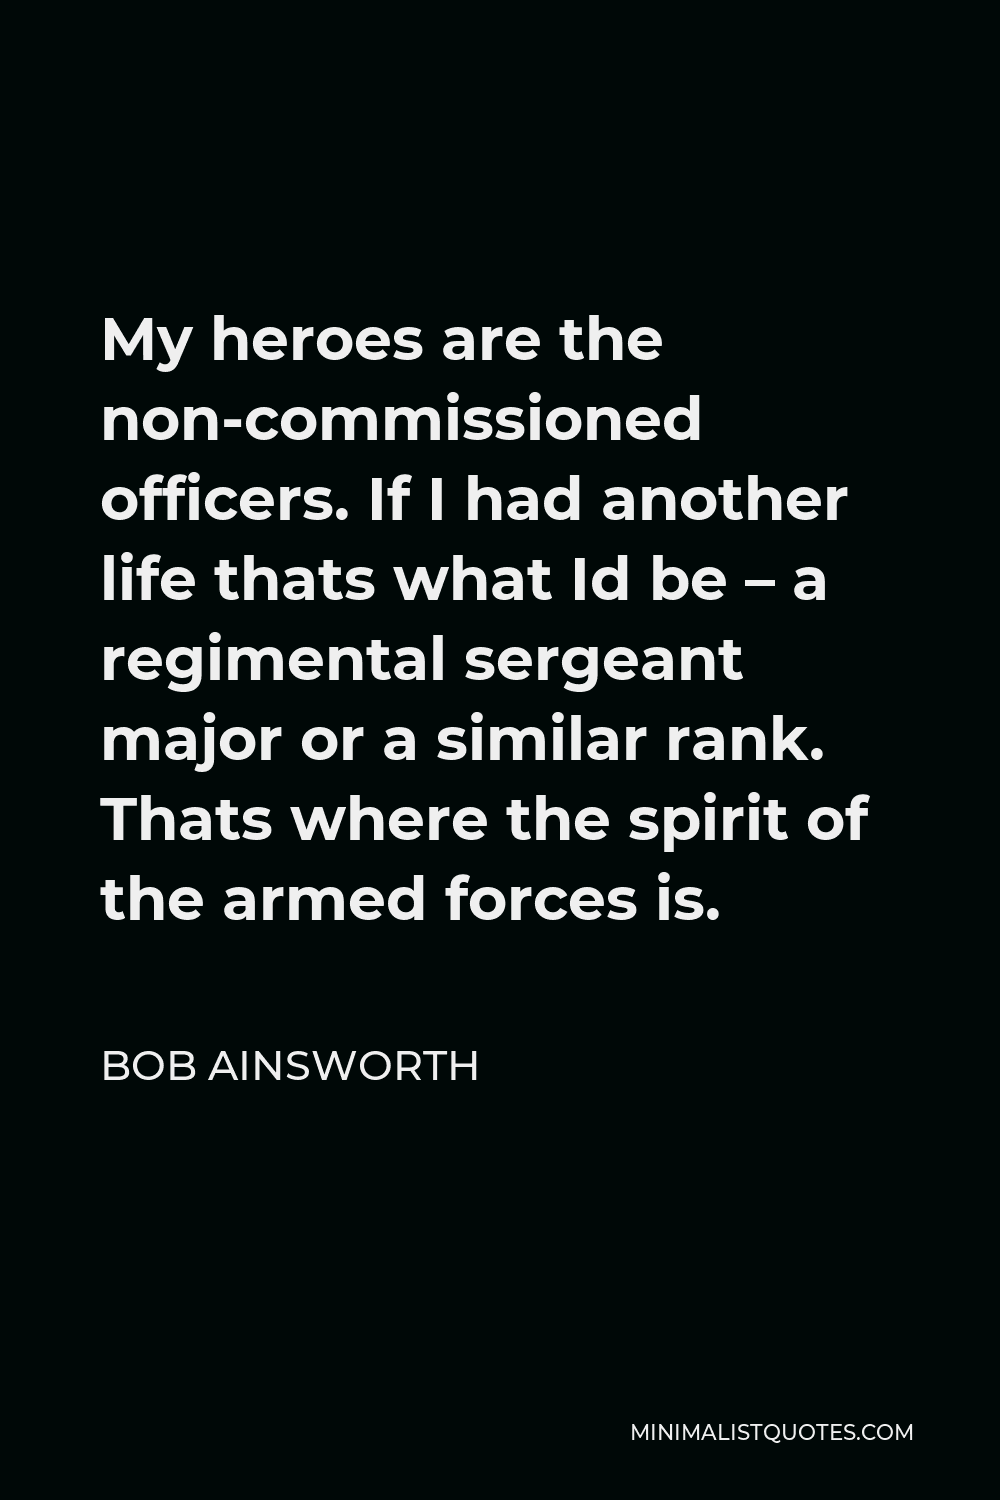 Bob Ainsworth Quote - My heroes are the non-commissioned officers. If I had another life thats what Id be – a regimental sergeant major or a similar rank. Thats where the spirit of the armed forces is.